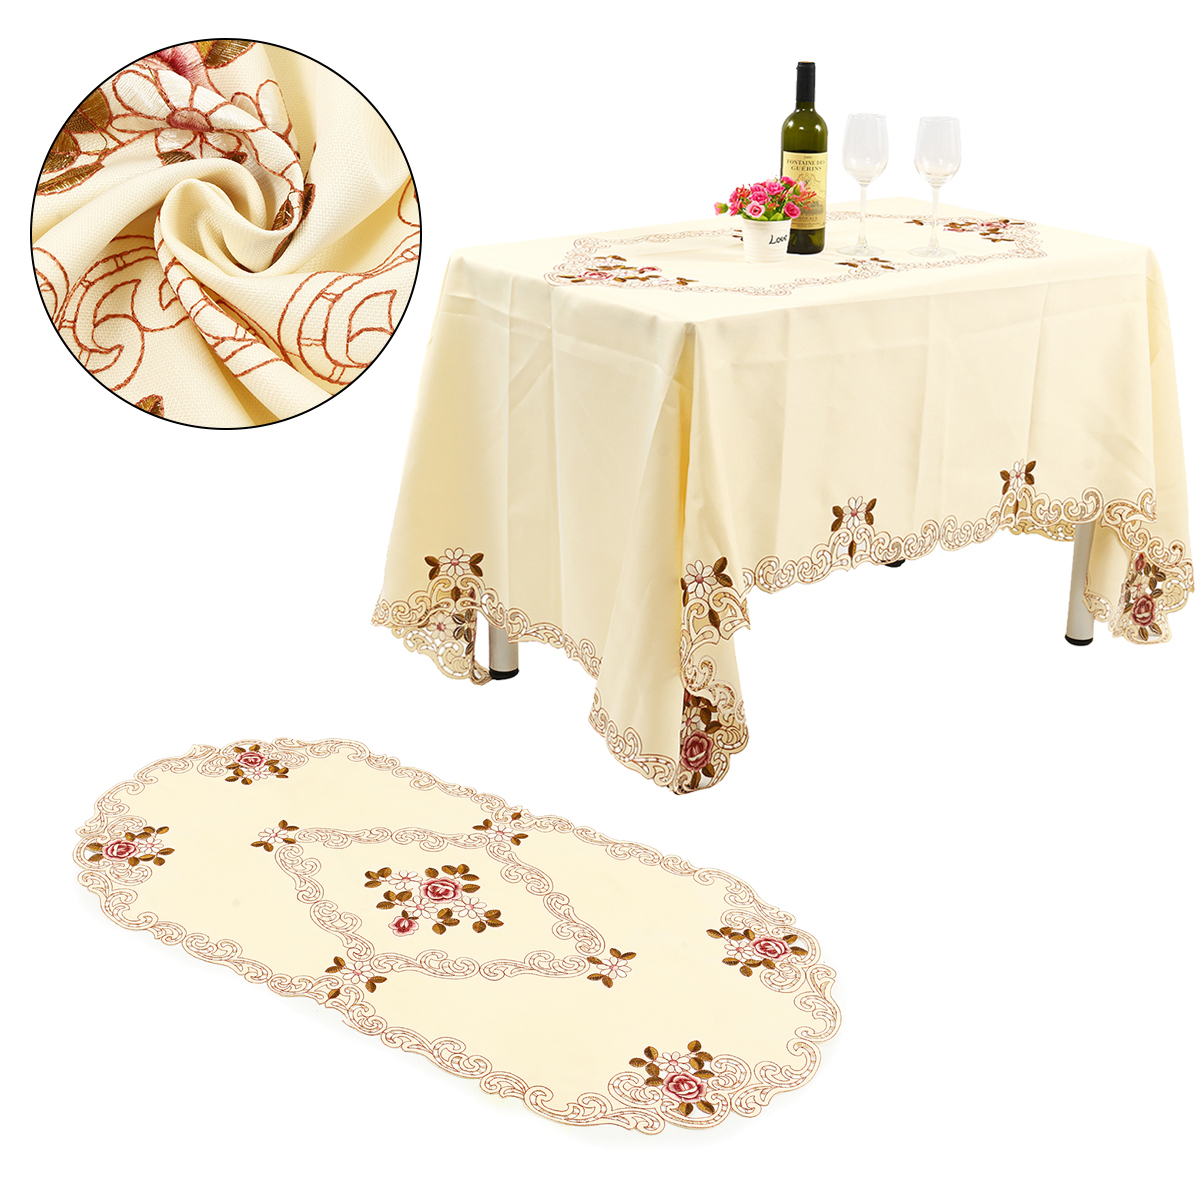 

Embroidered Tablecloth Home Table Decor Lace Rose Cutwork Restaurant Table Cover